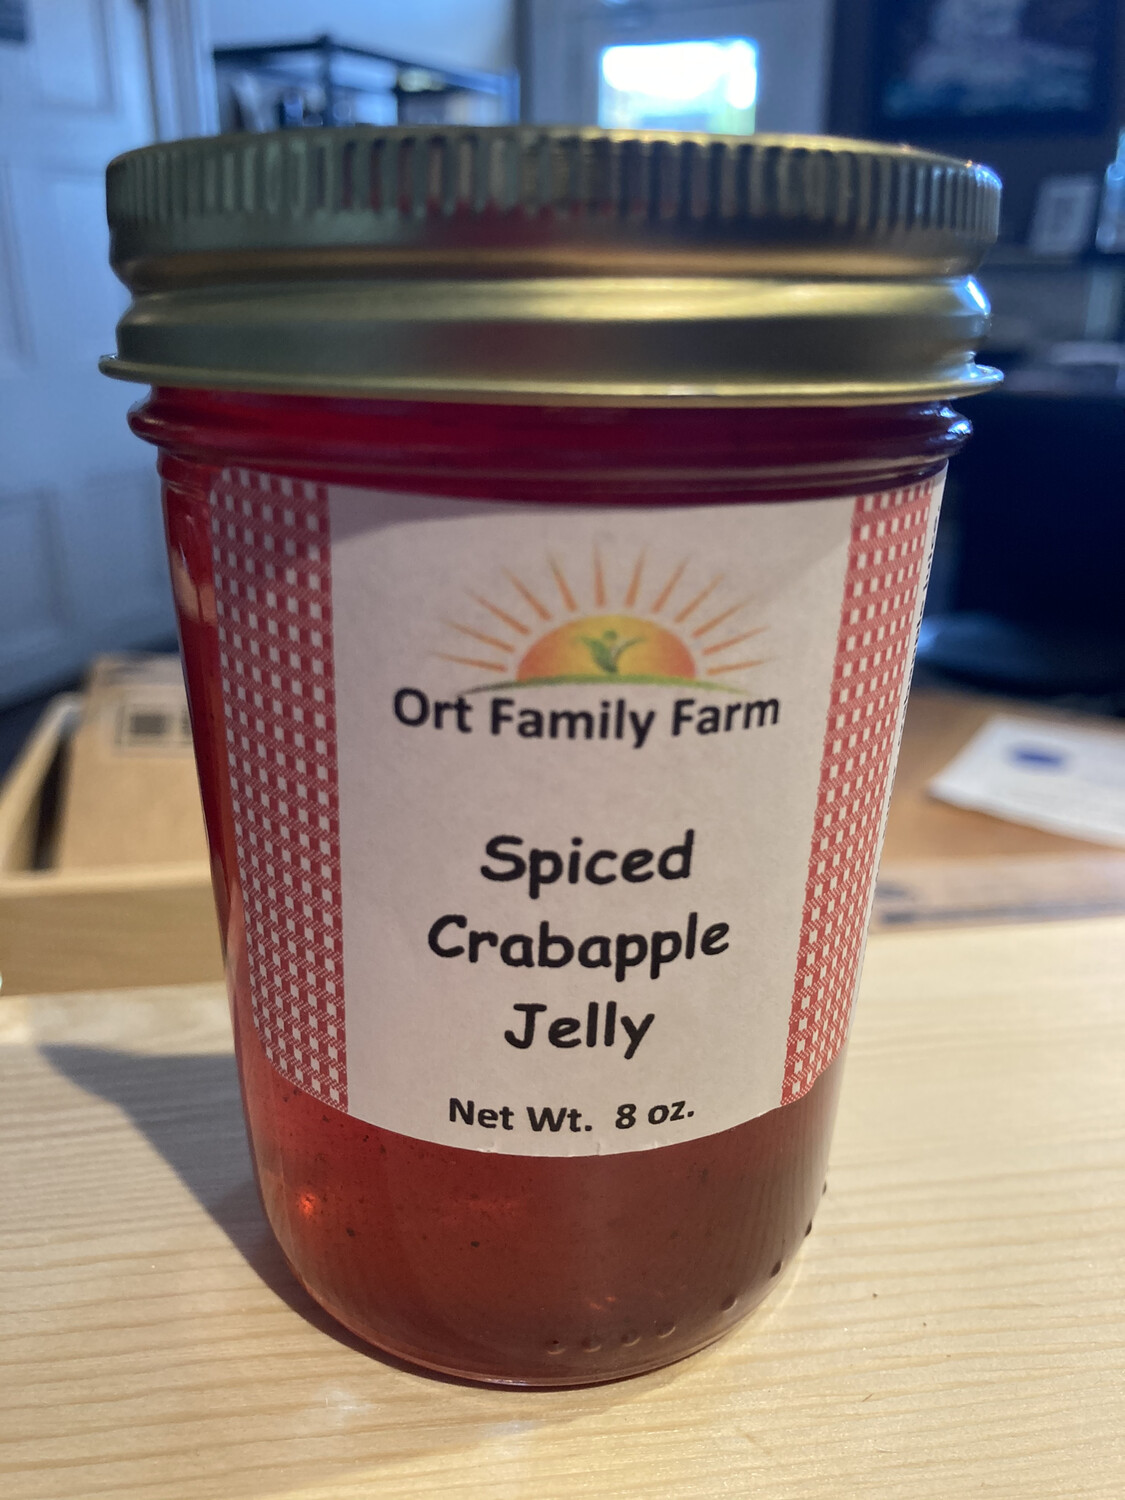 Spiced Crabapple Jelly 8 oz